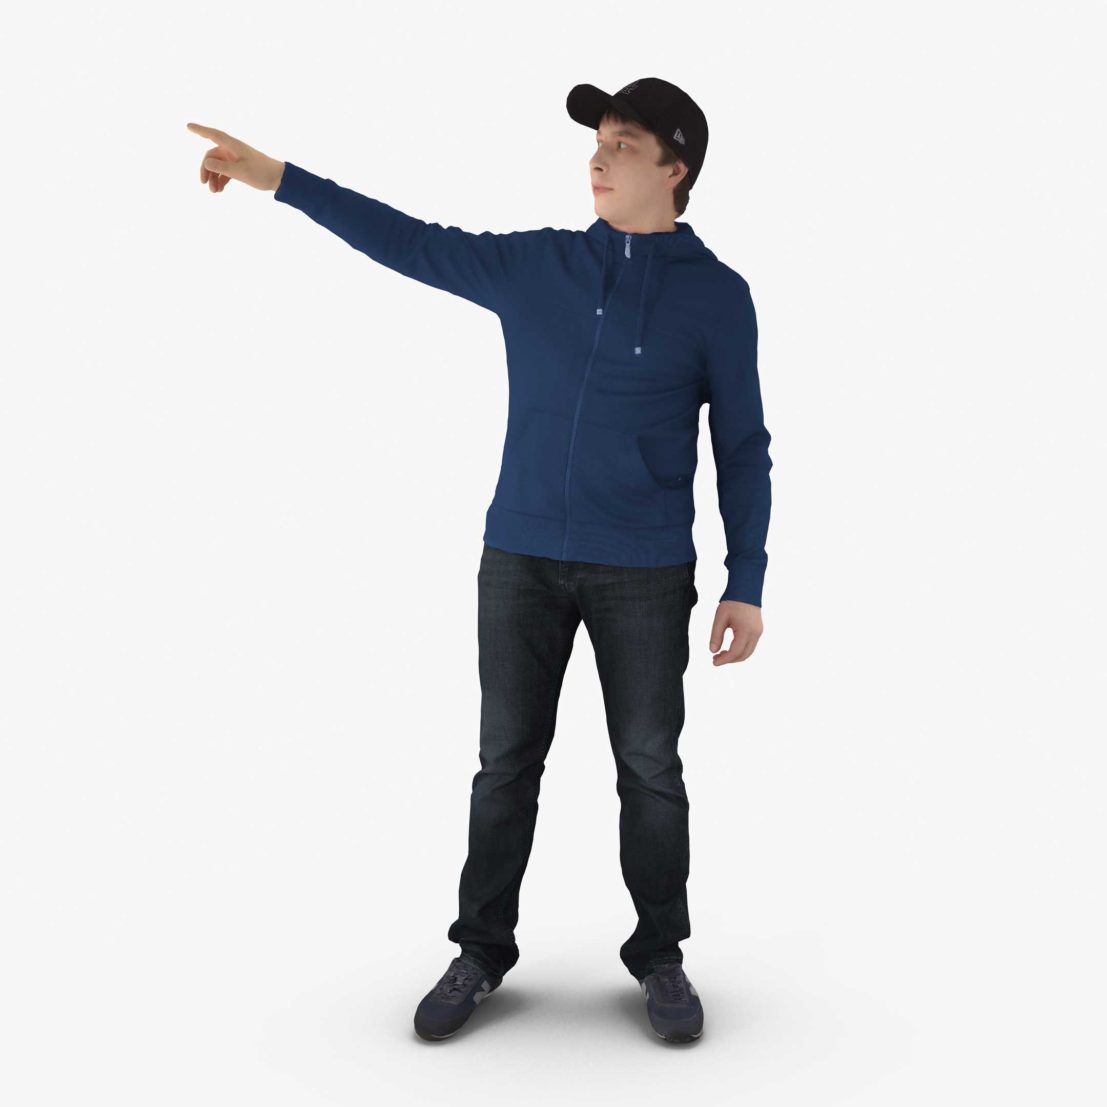 Casual Man Pointing 3D Model, for download files in 3ds, max, obj, fbx with low poly, game, and VR/AR options. Ready for 3D Printing.